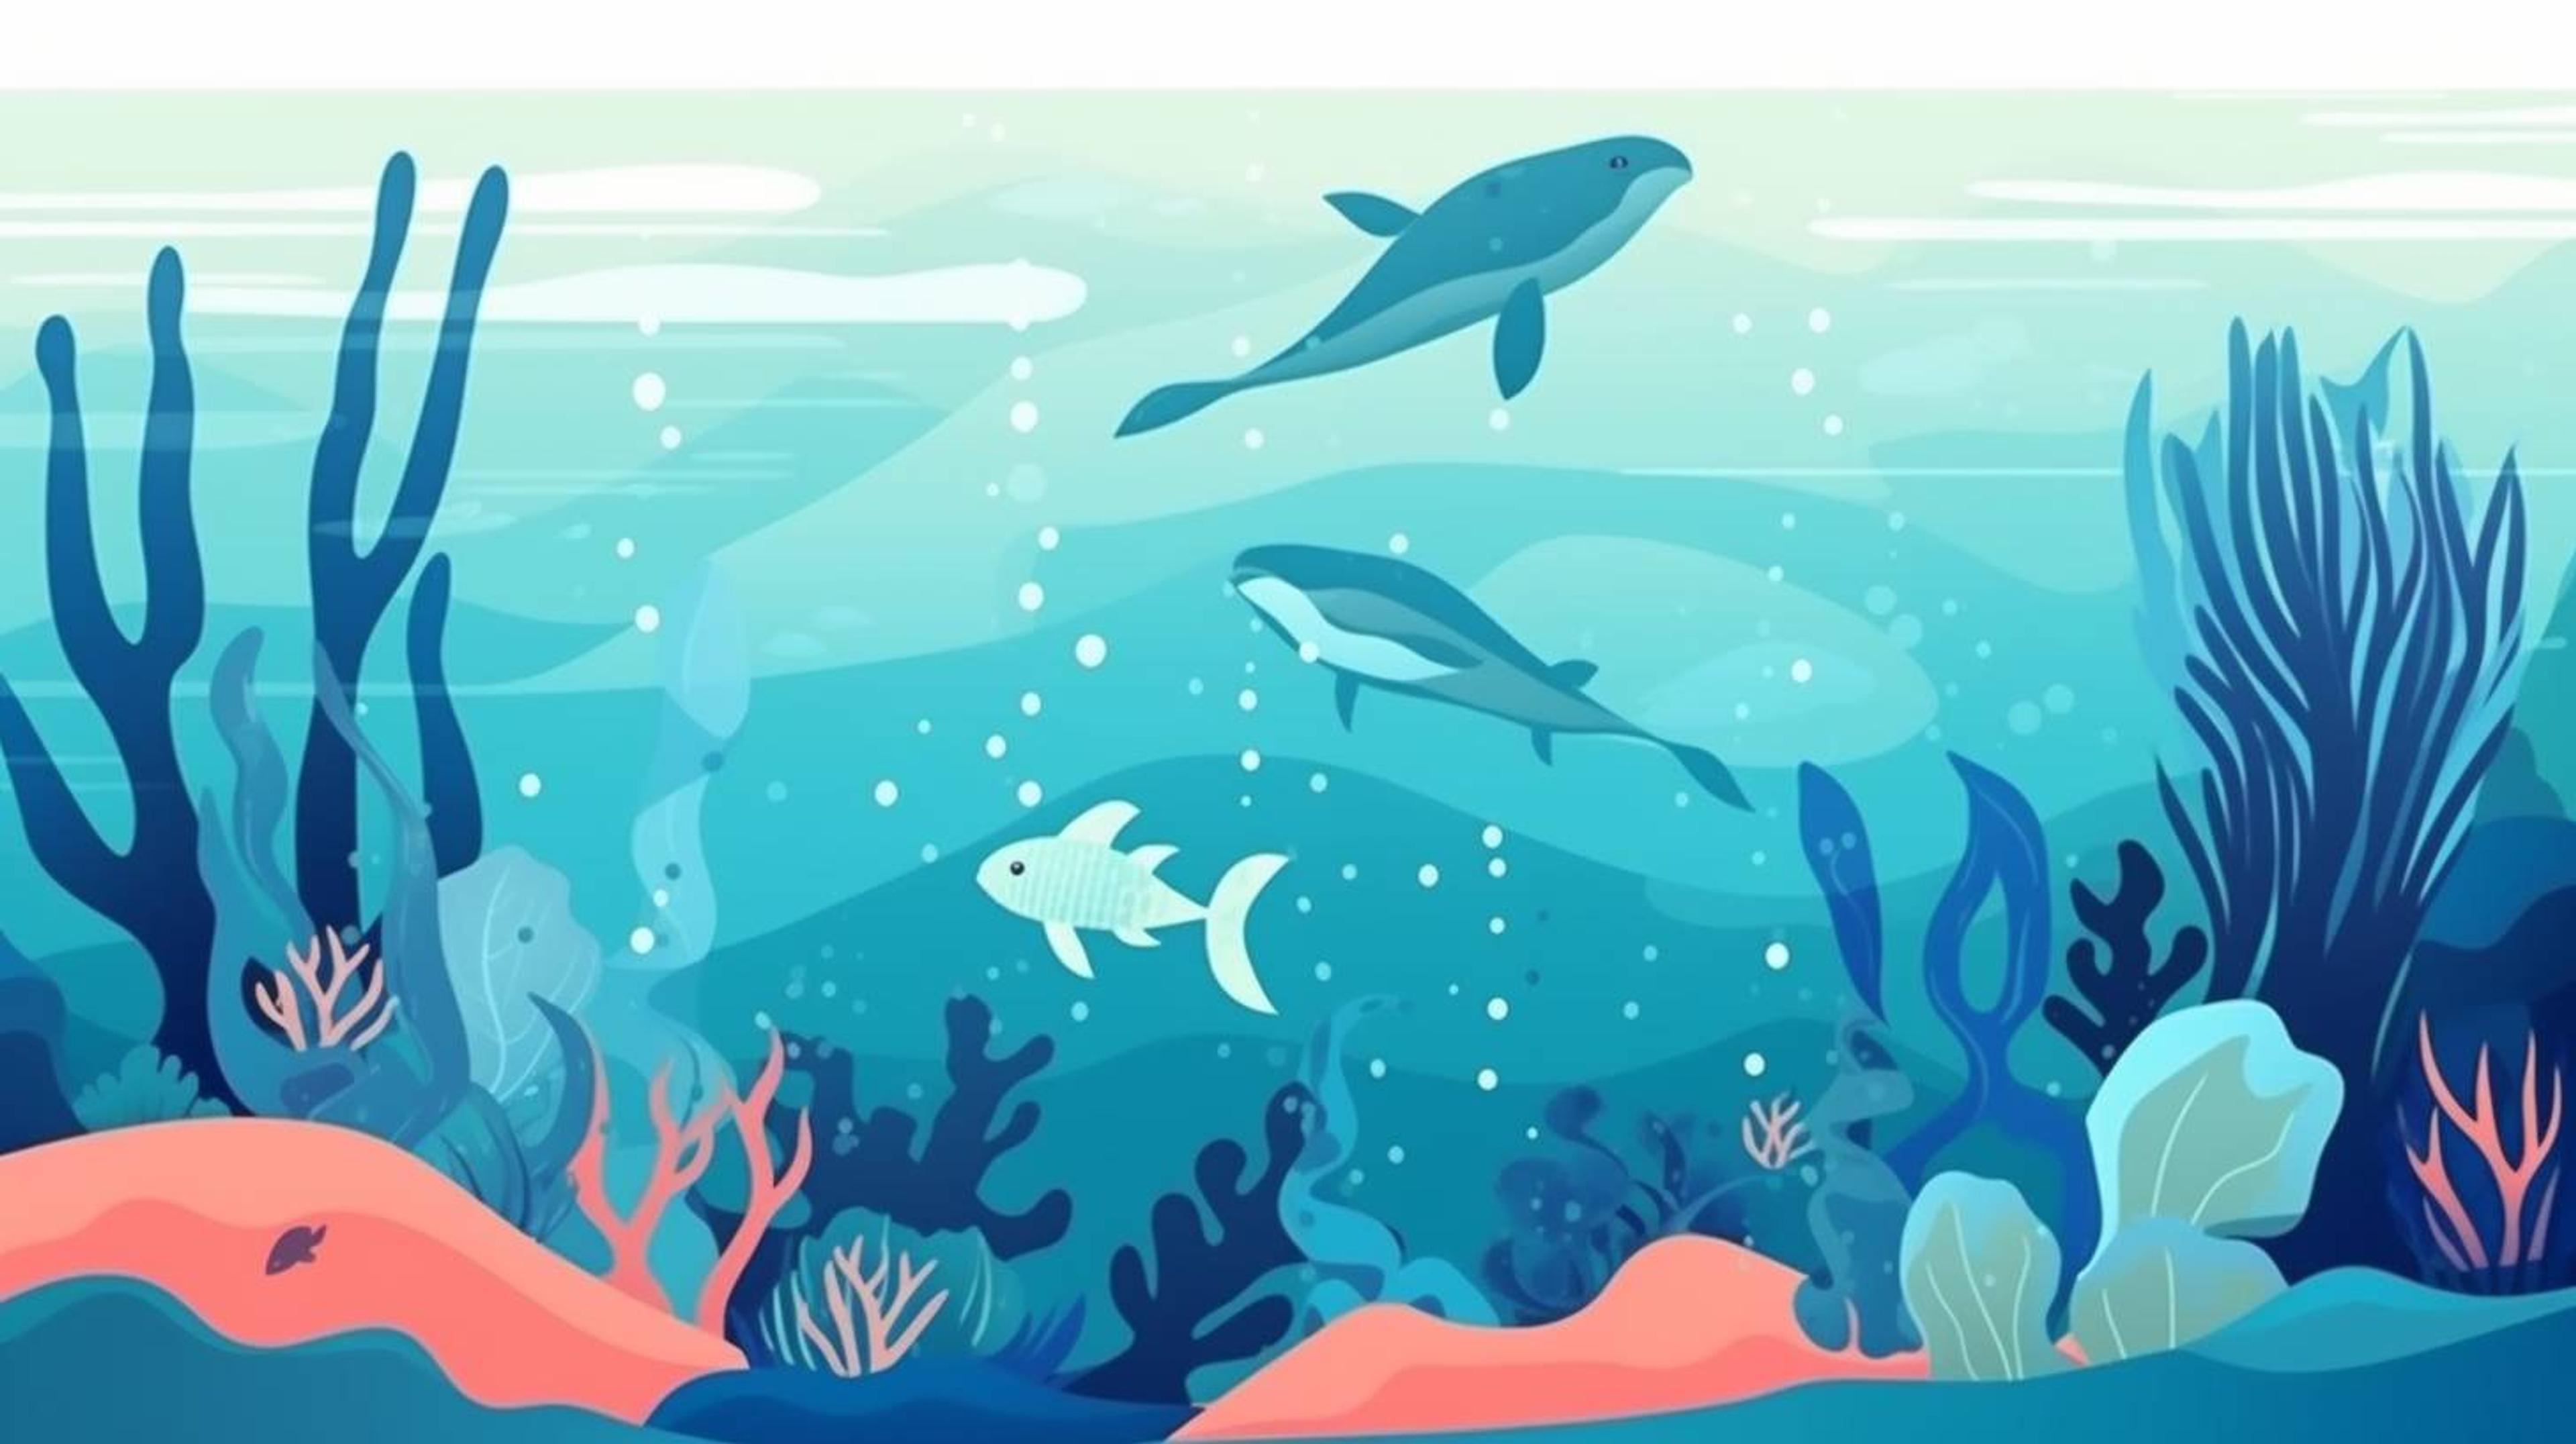 SDG 14: The Blueprint to Conserve and Sustainably Use Our Oceans